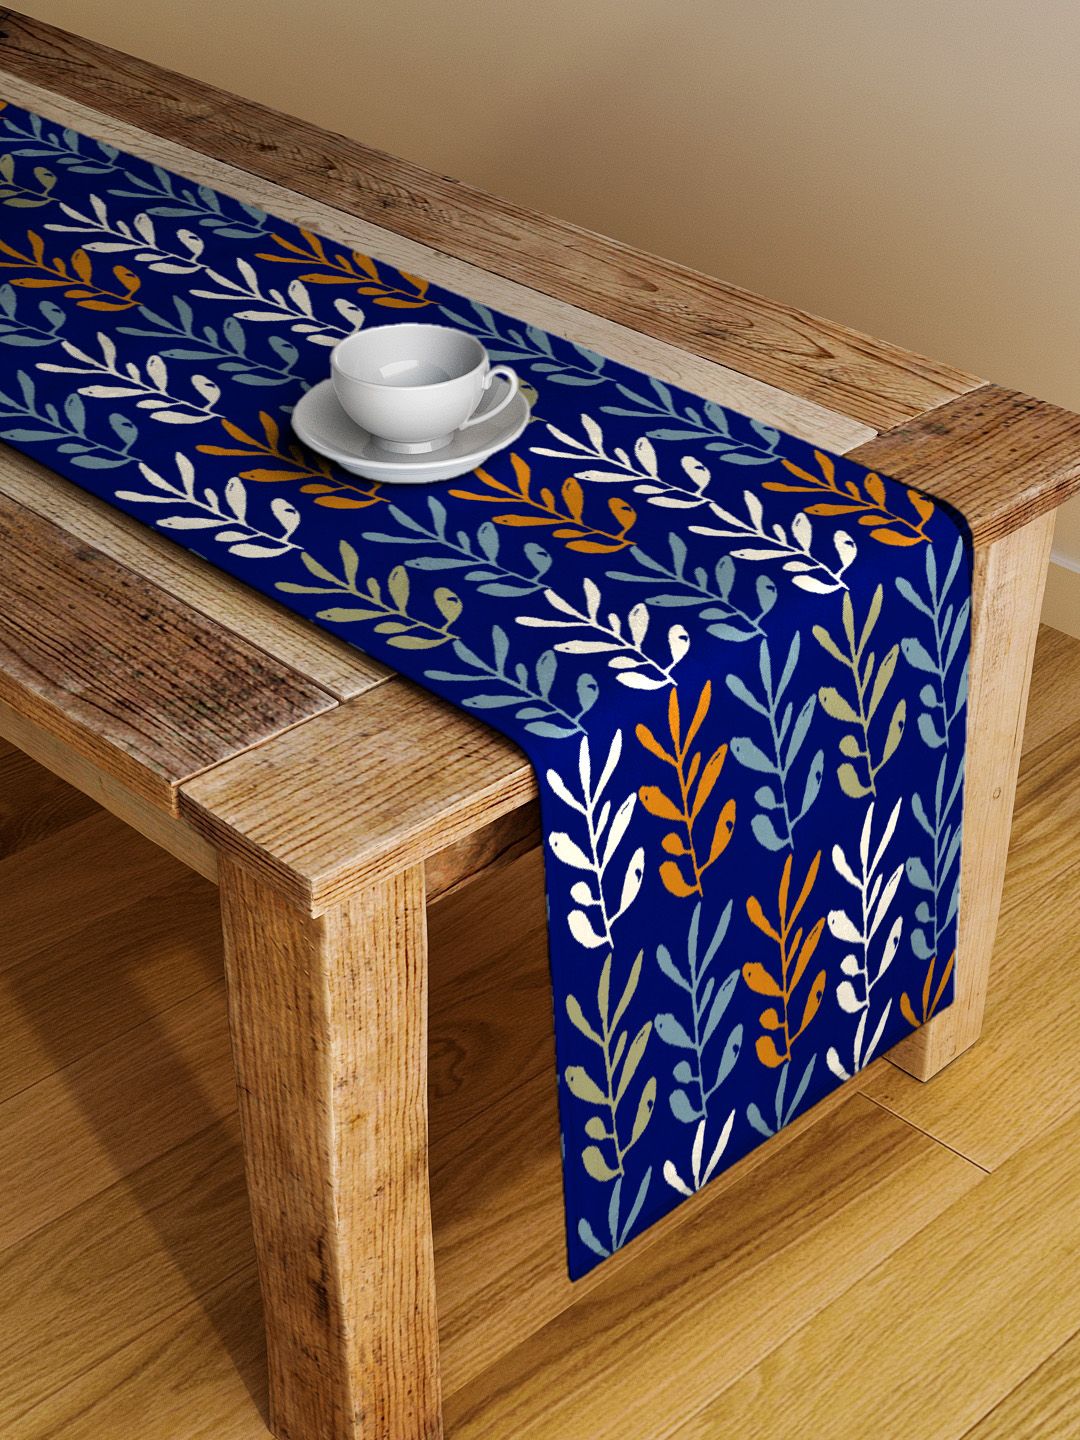 Alina decor Blue Leaves Table Runner Price in India